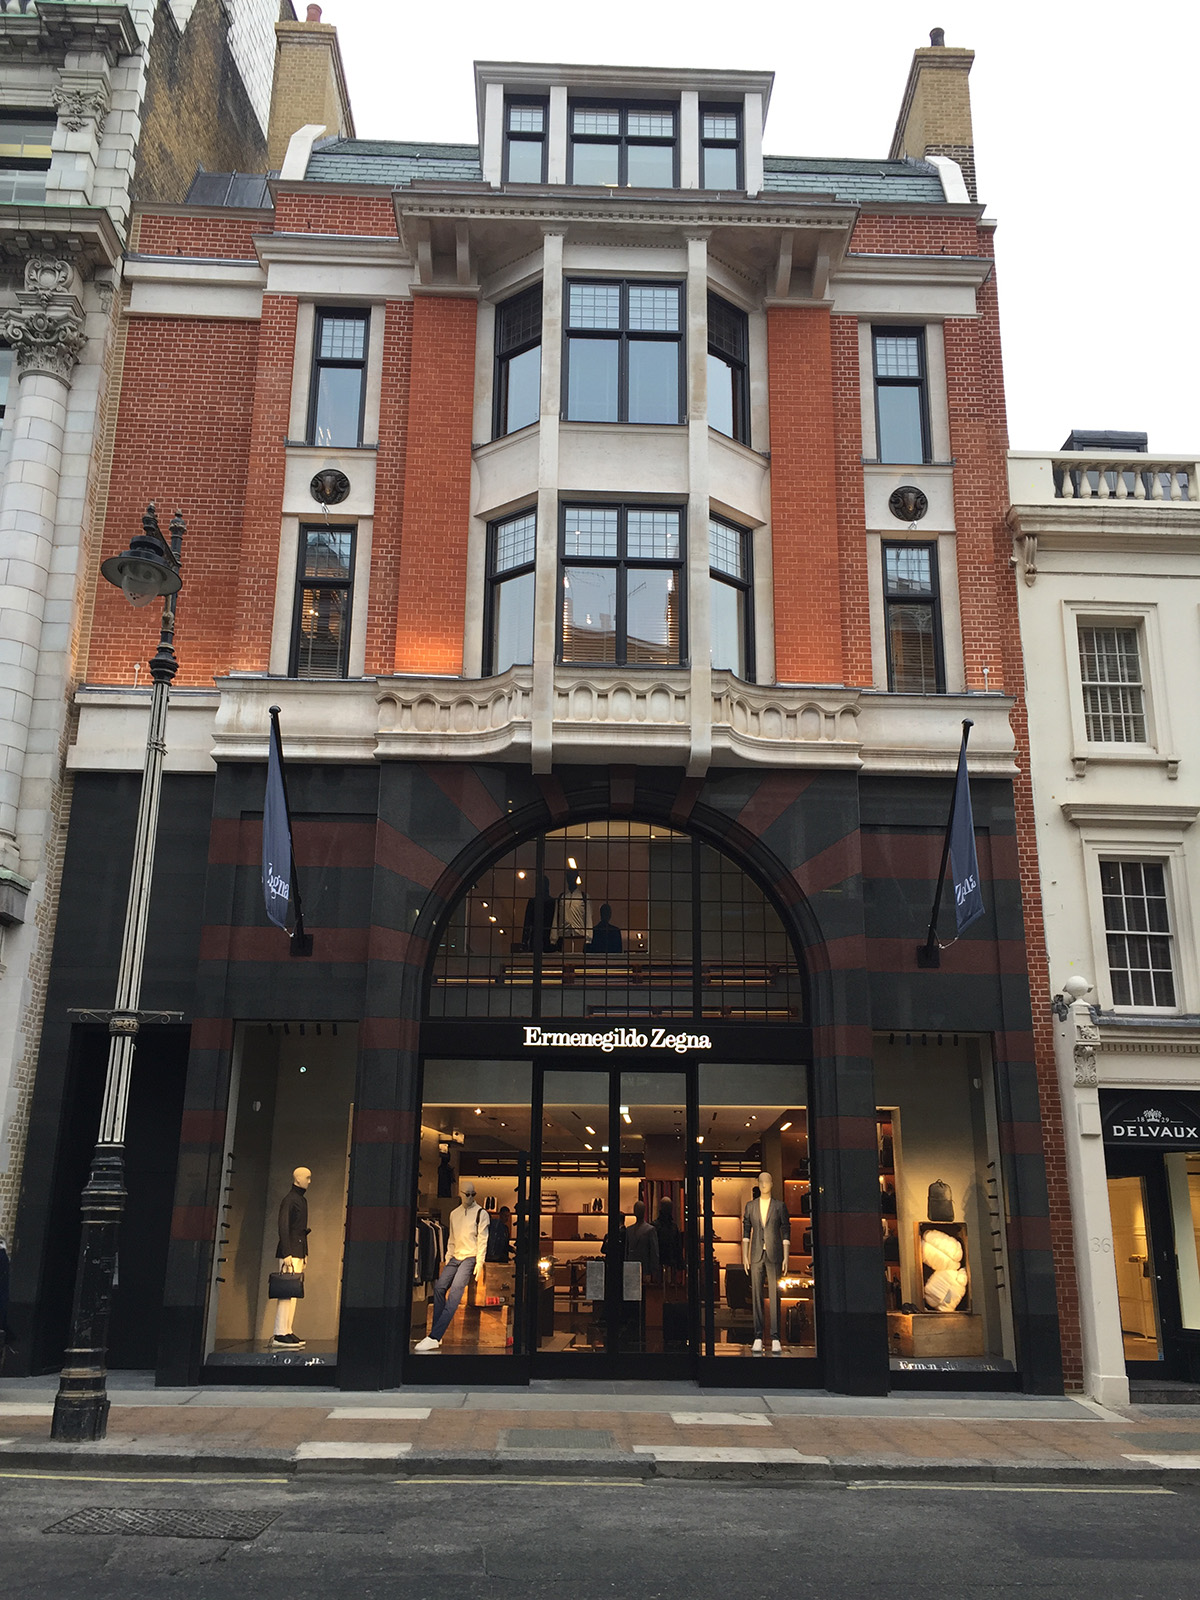 Teaming up with Ermenegildo Zegna on the construction project for their clothes shop Central London involved painting, carpentry, skimming and plastering. This commercial construction project resolved into a stylish and glamorous newly built store that now welcomes visitors at 37-38 New Bond Street.